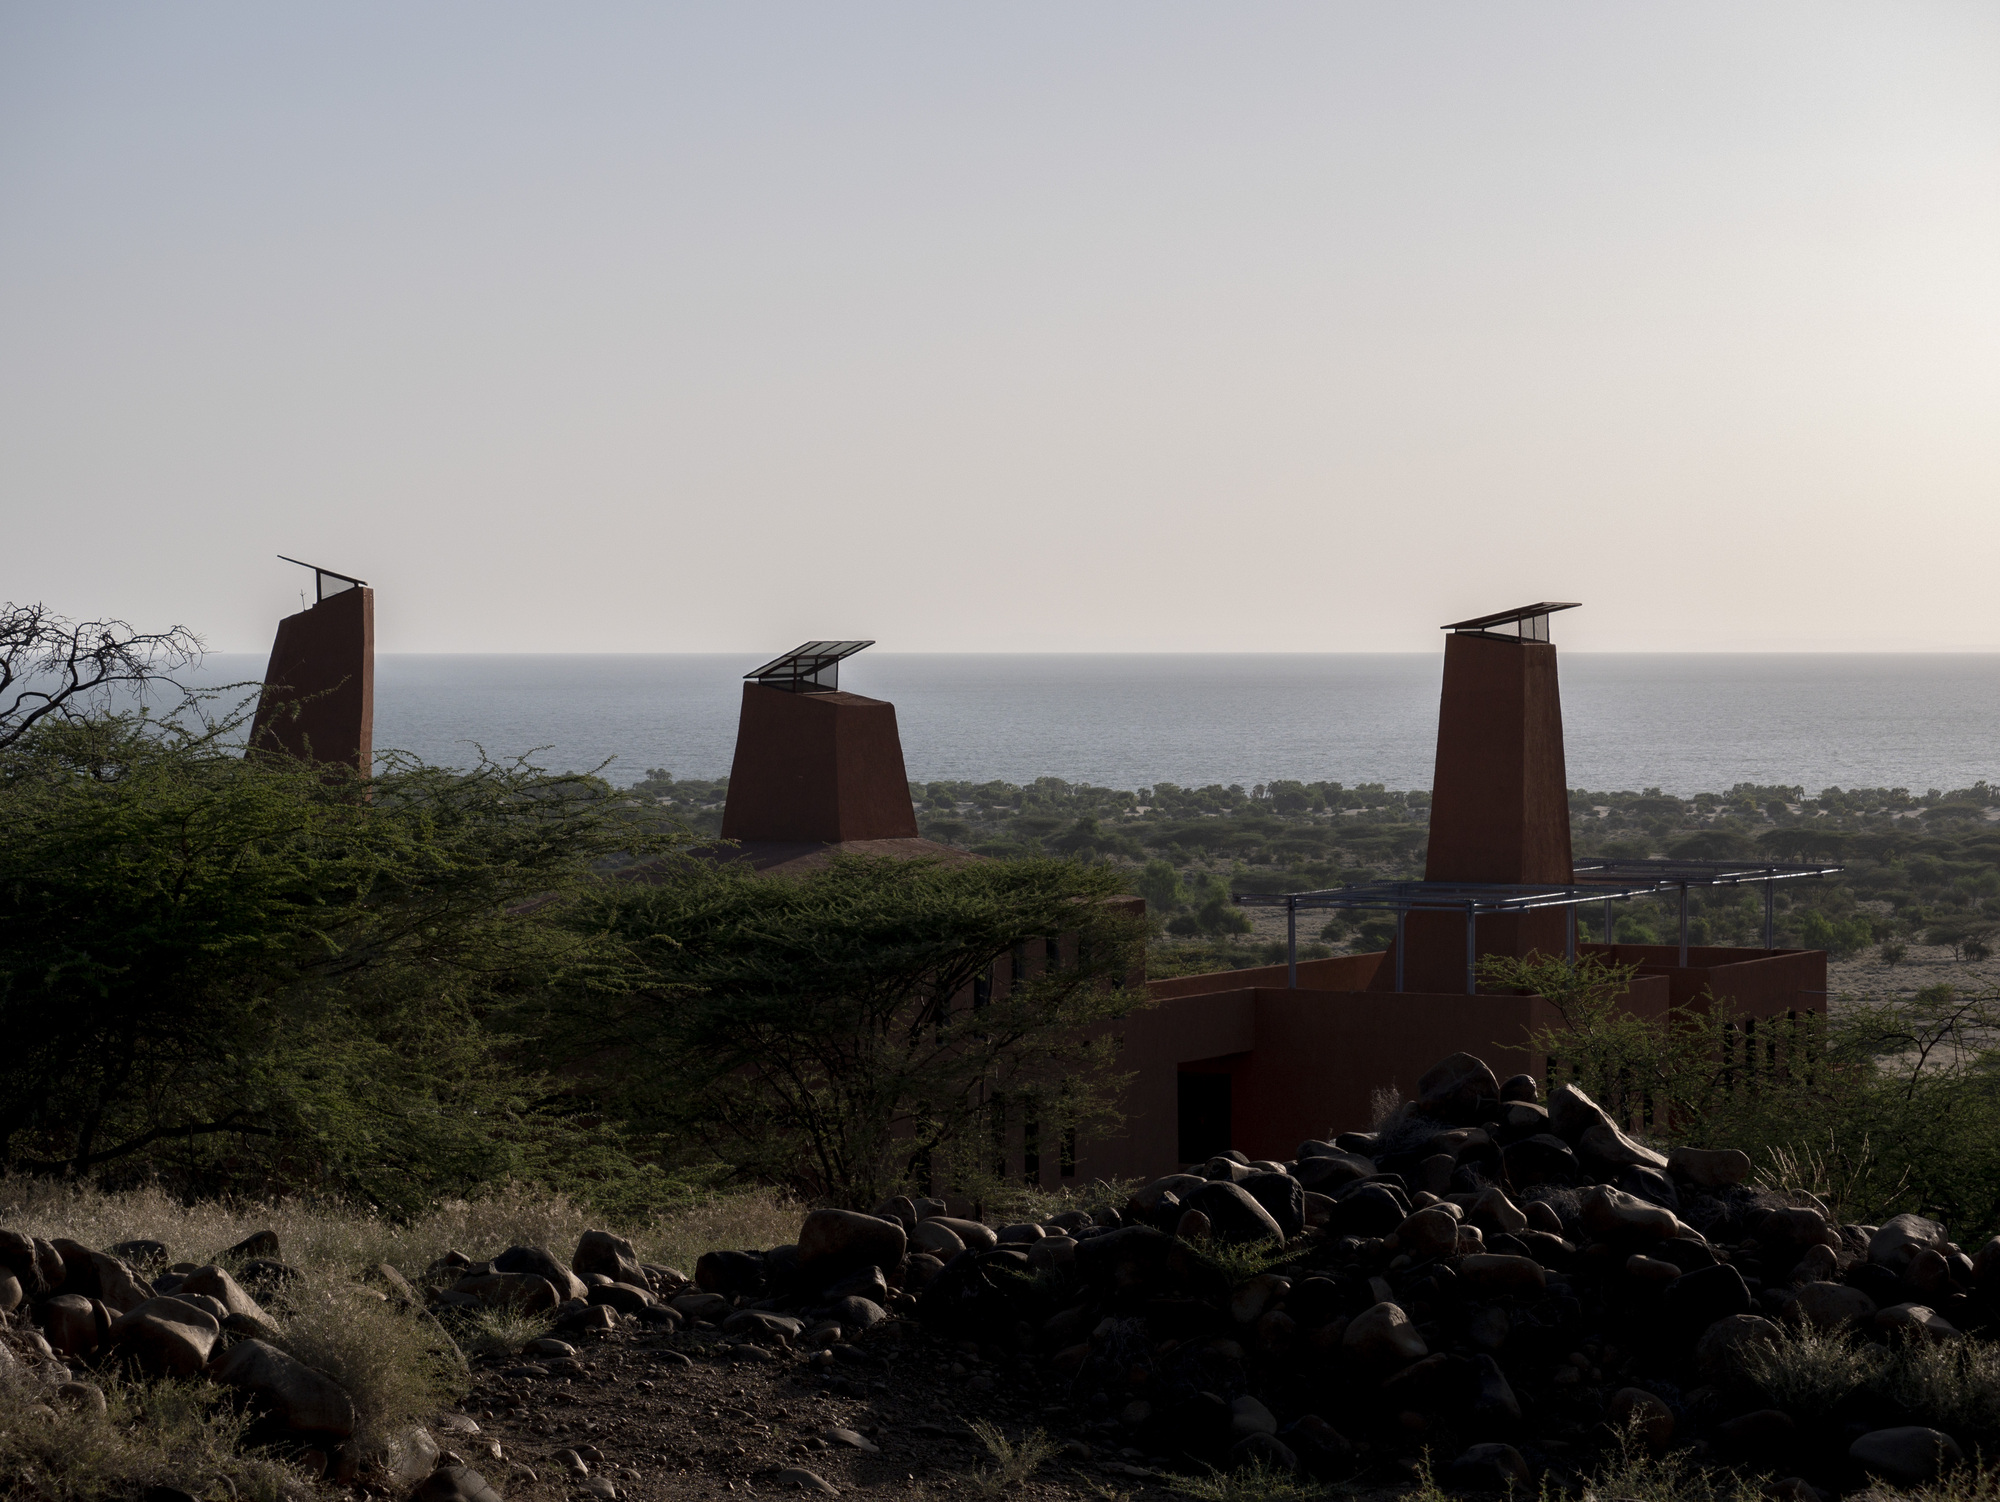 Information Technology and Technology (ICT) campus located on the shores of Lake Turkana.